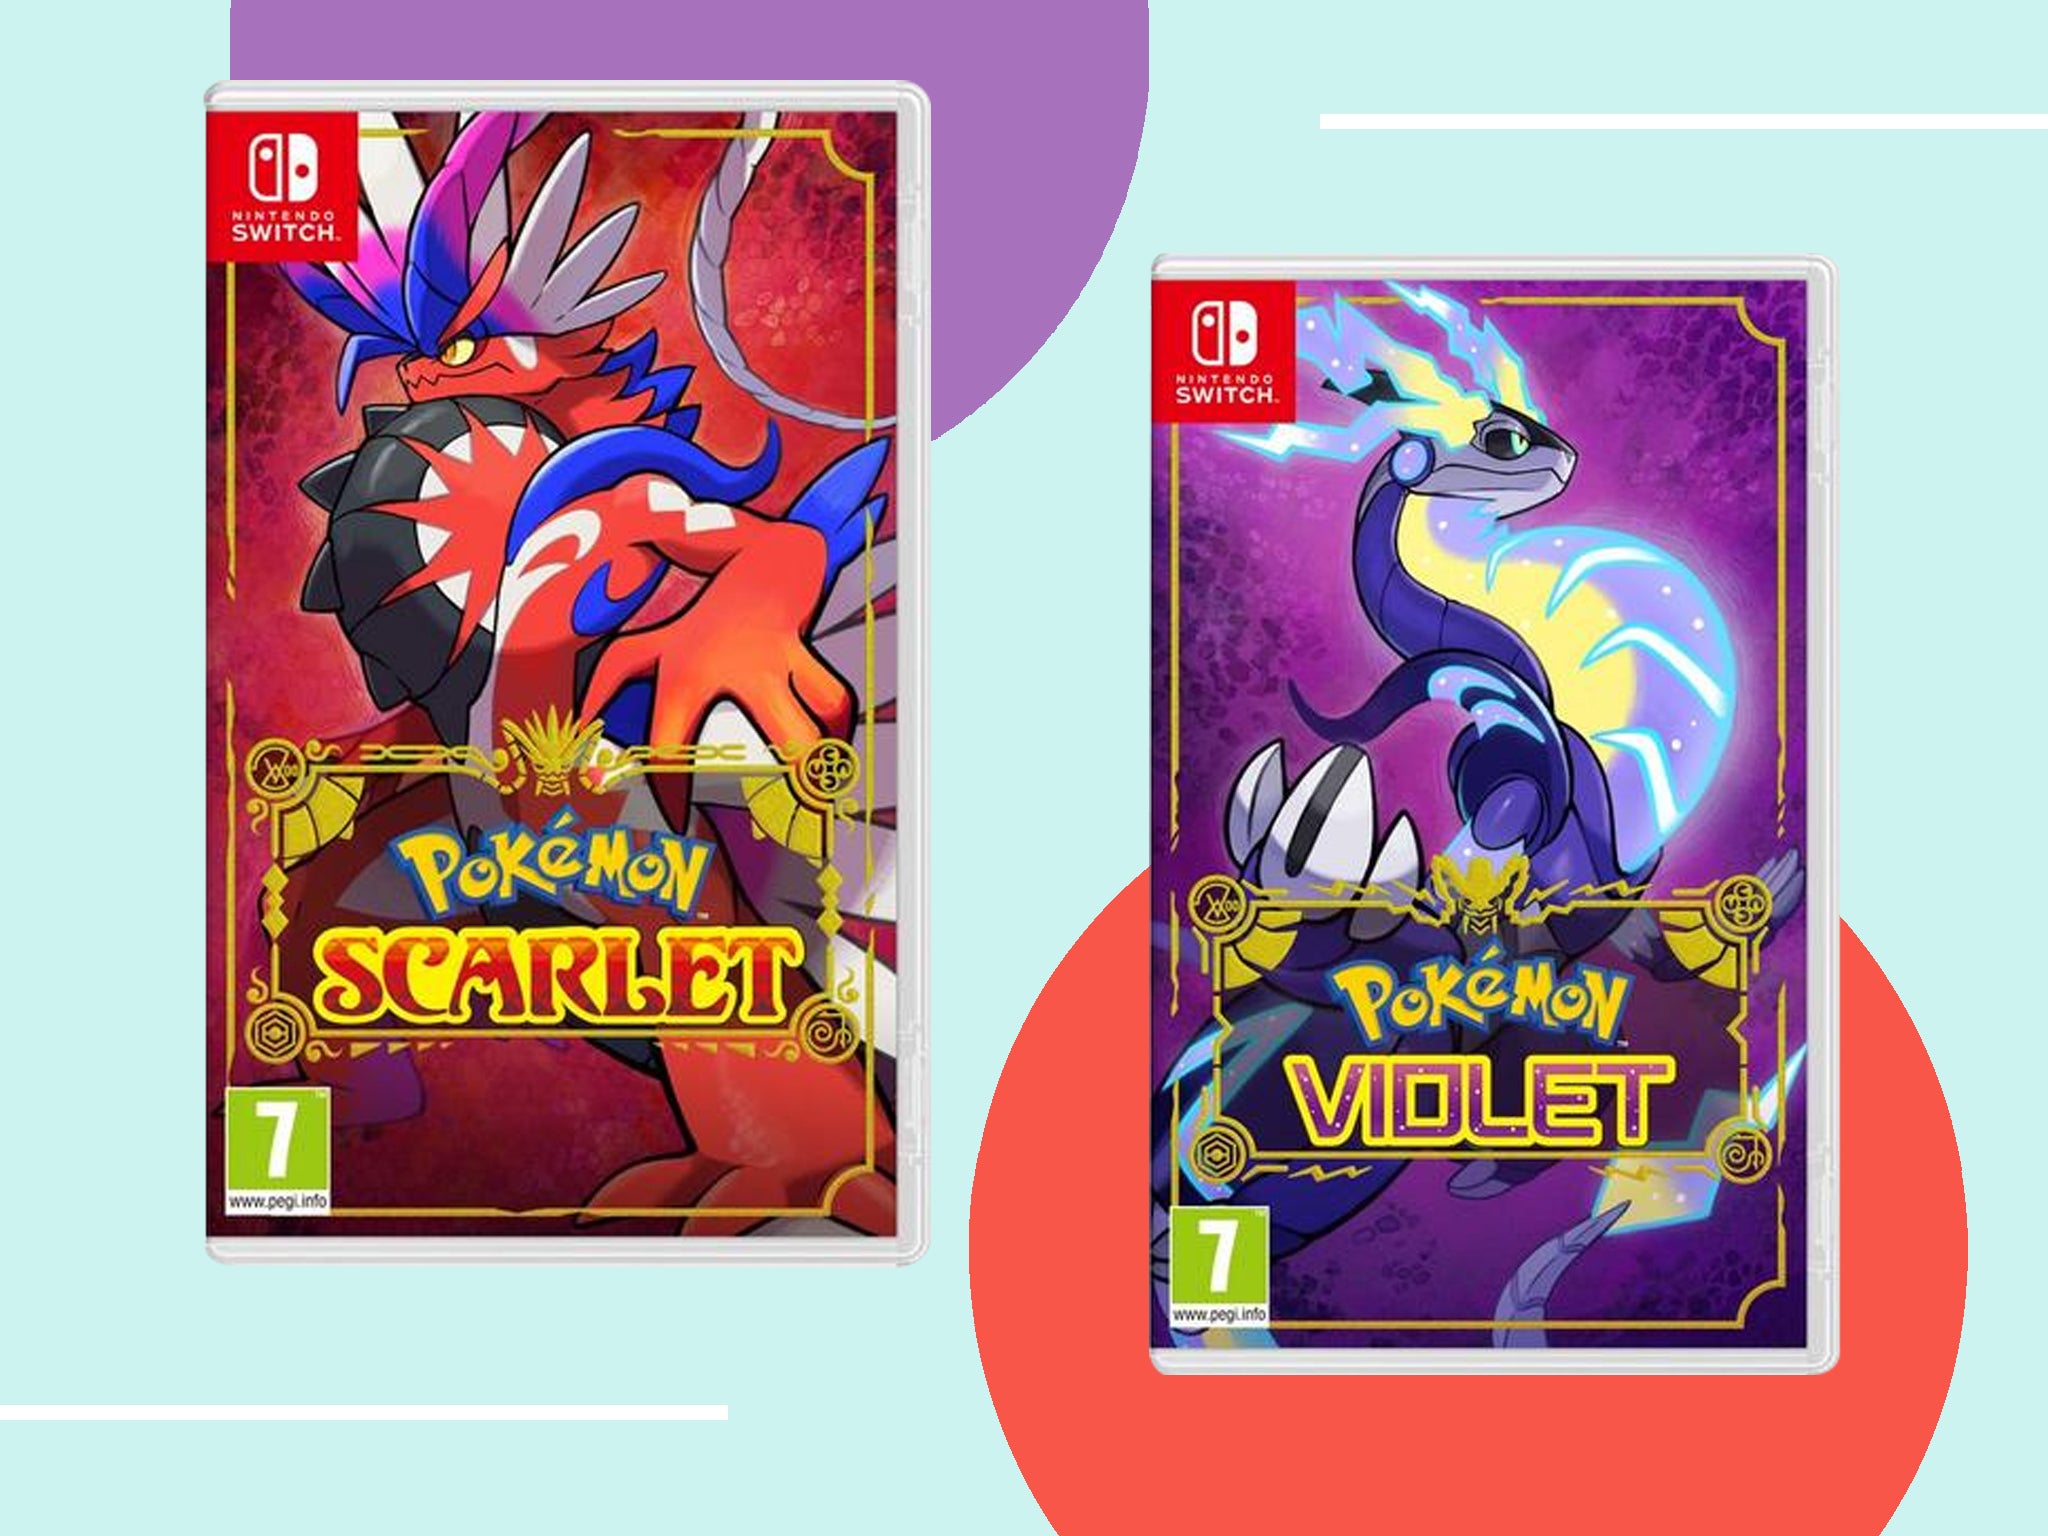 Catch them all with these excellent deals